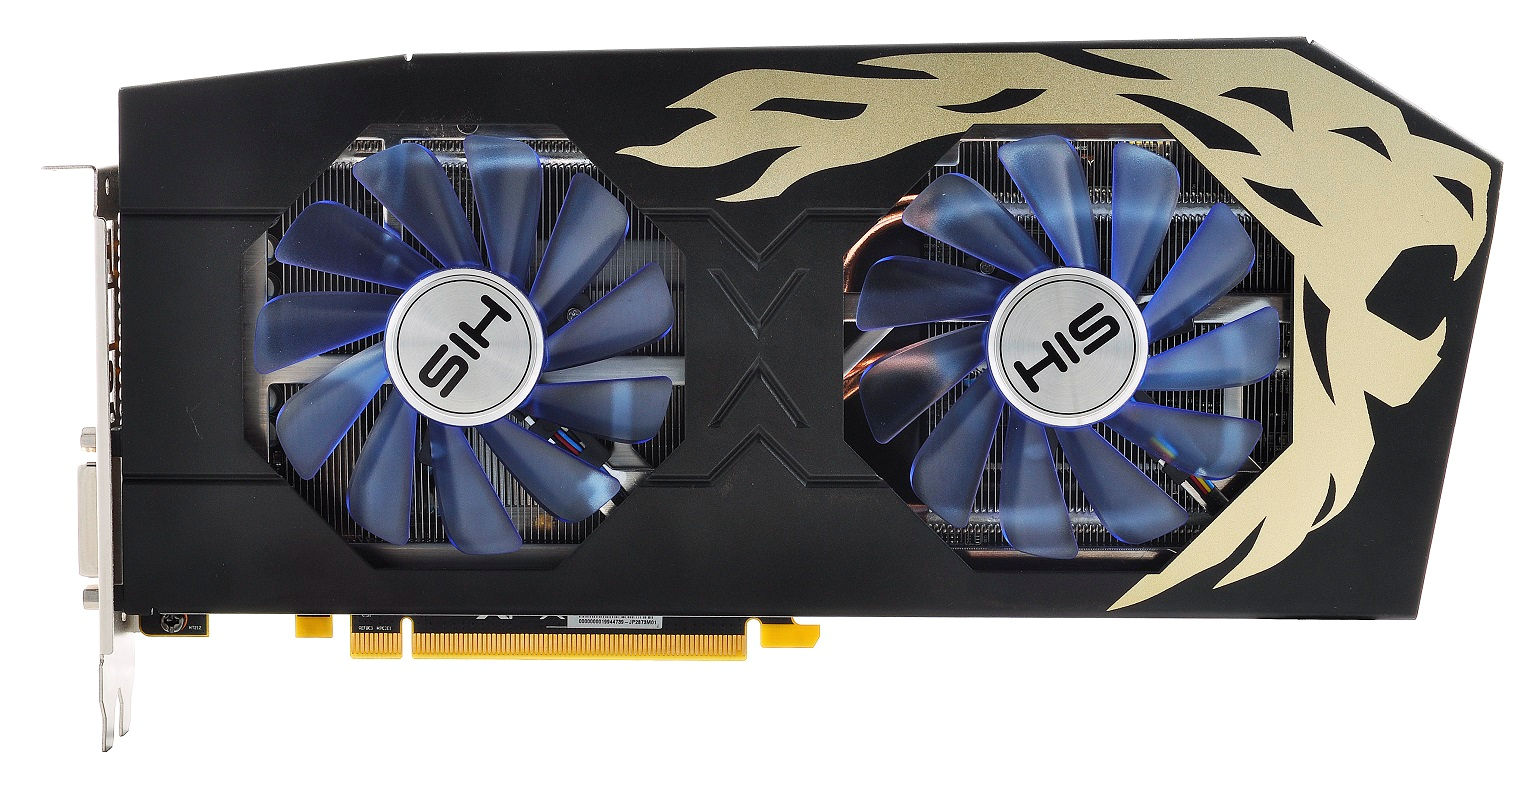 HIS launches Radeon RX 580 and RX 570 